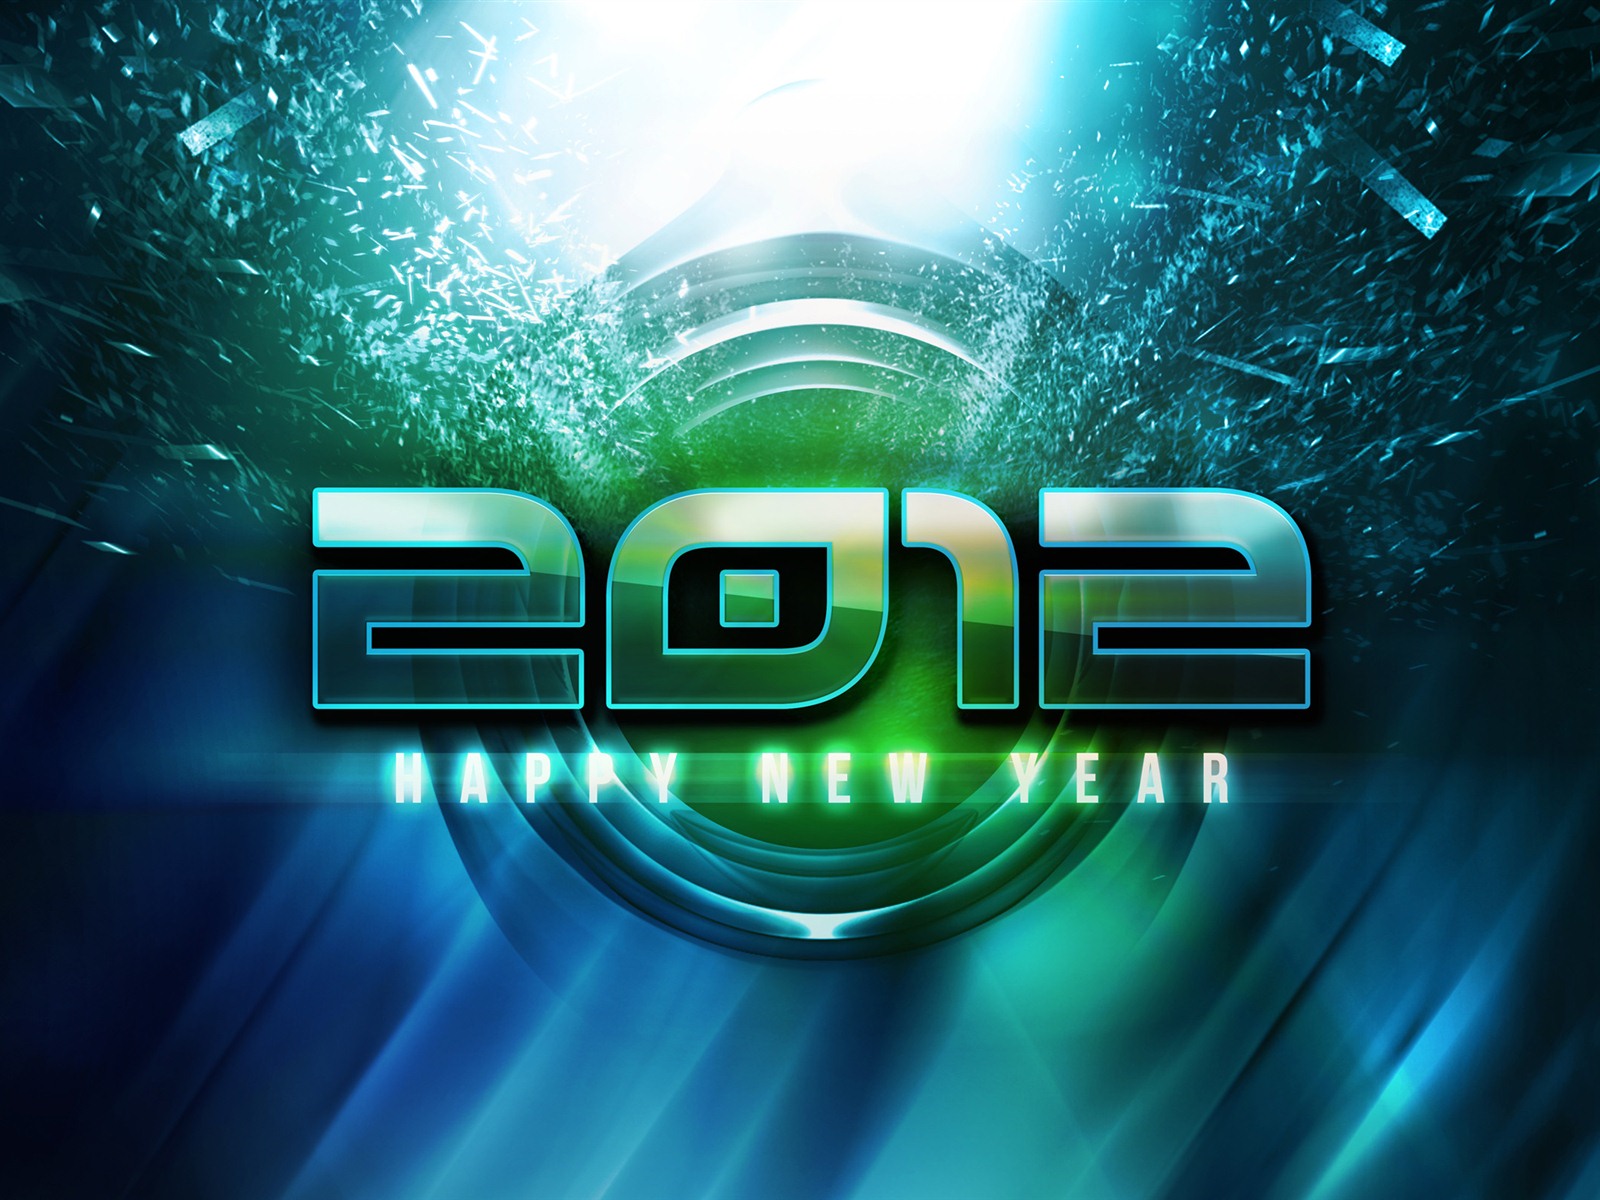 2012 New Year wallpapers (2) #1 - 1600x1200